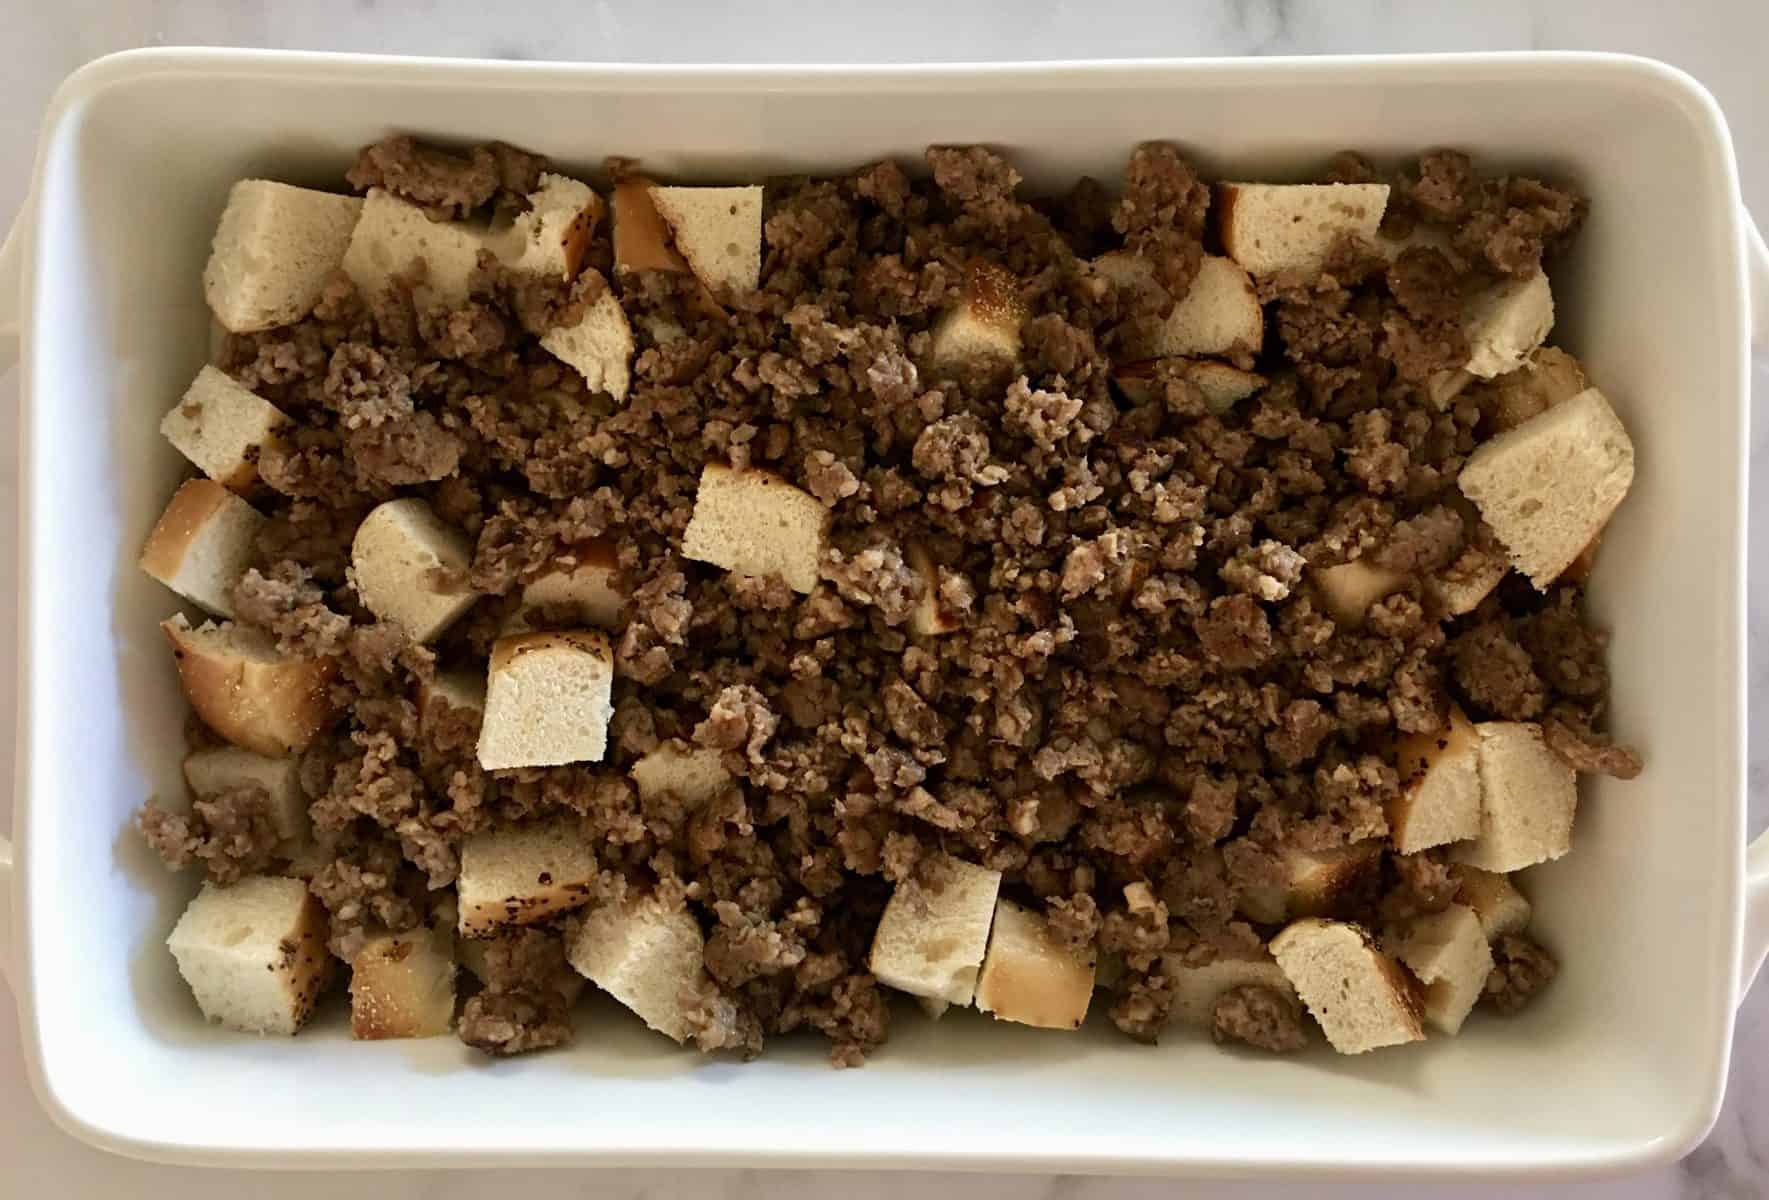 Cut up bread and cooked meat in a white casserole dish. 